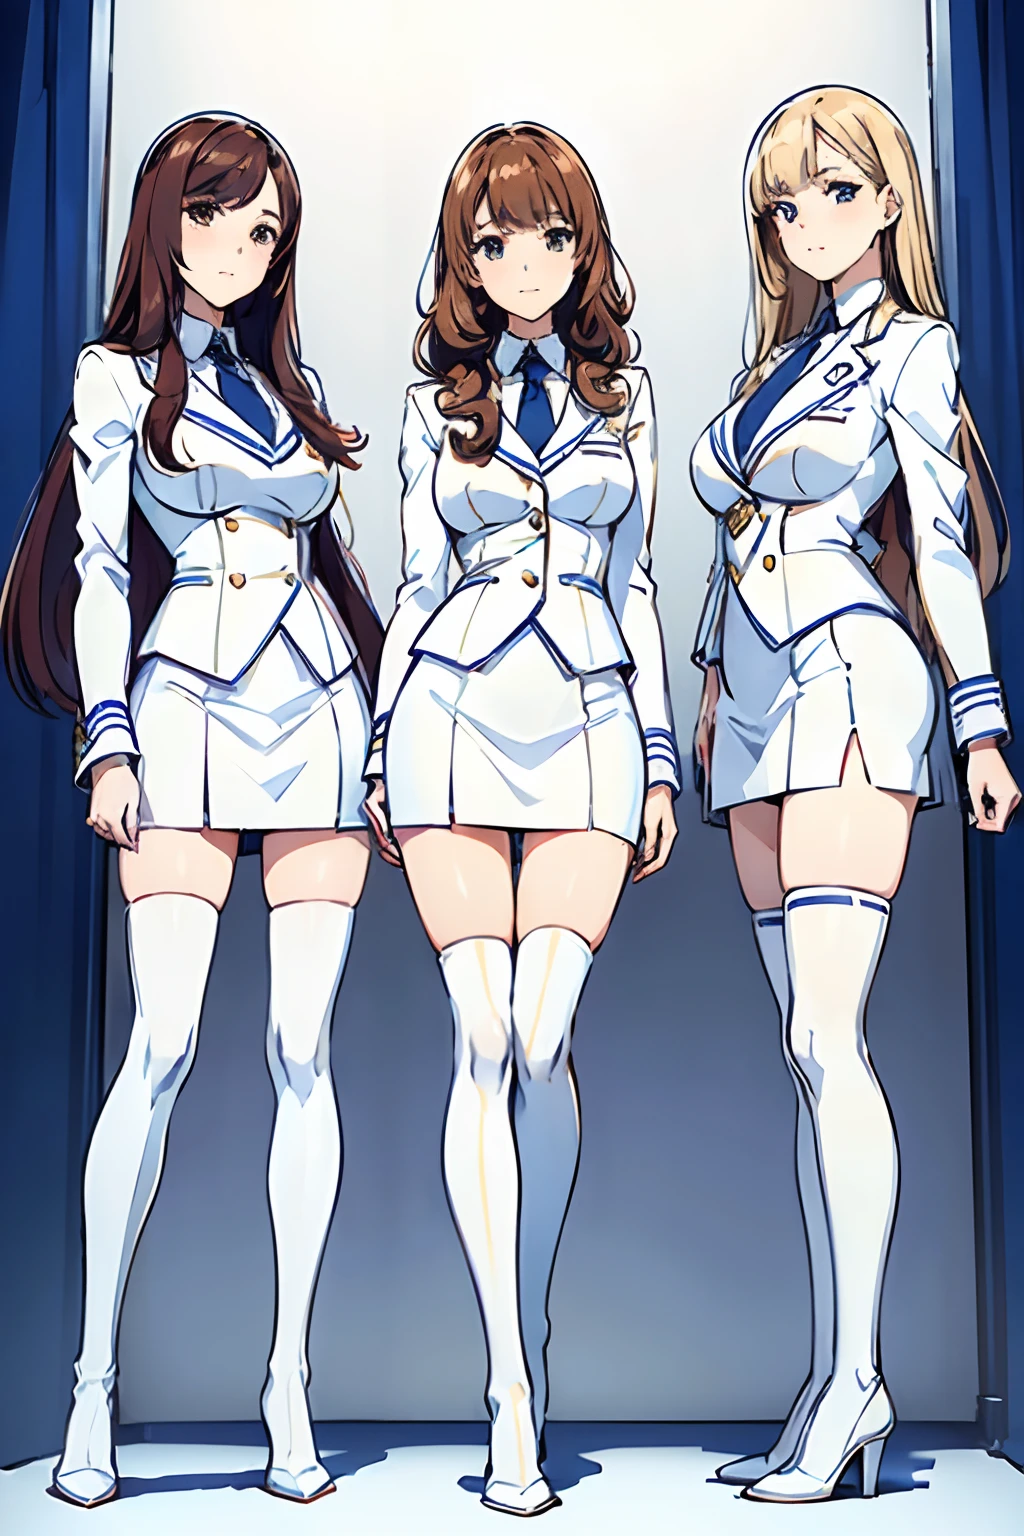 ((masterpiece, best quality, 8k, highres:1.2)), white and blue skirt suit, highleg, hazel eyes, white and blue blazer, neckties, medium breasts, white and blue pencil skirt, white thighhigh heeled boots, (curly hair, long hair, one brown haired sister, one blonde sister, one redhead sister), (3girls, trio, triplets, clones), ((matching hairstyles, different hair colors, matching faces, matching outfits)), full body, same pose